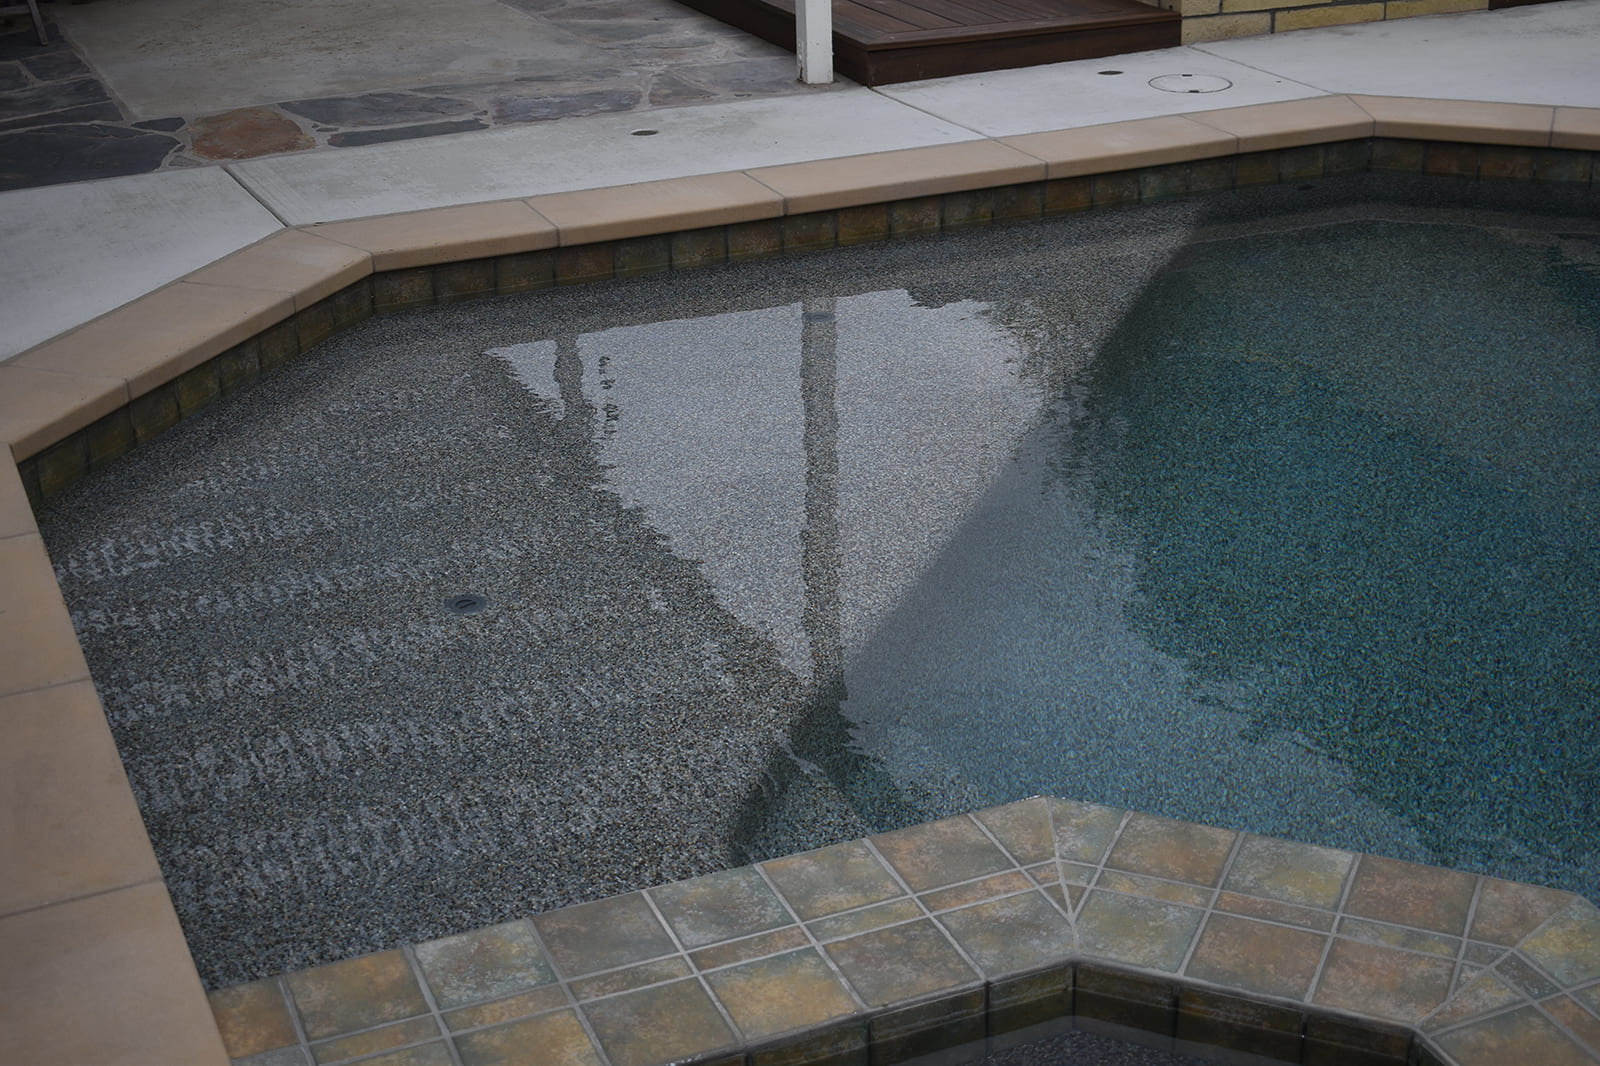 Alan Smith Pool Plastering & Remodeling | Patio Covers